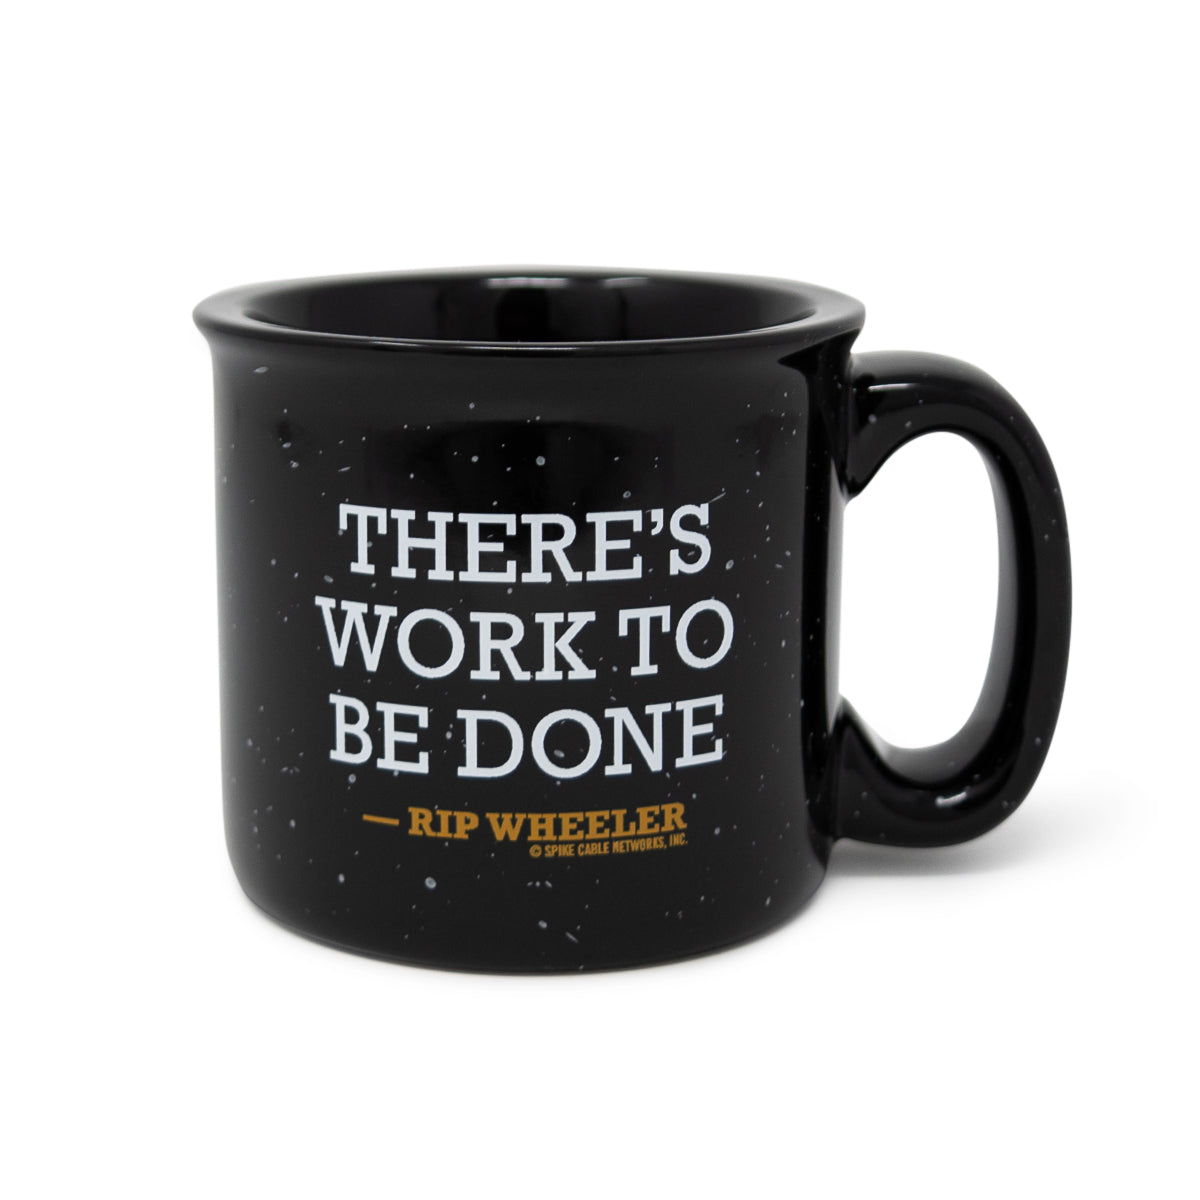 Yellowstone Rip Wheeler There's Work to Be Done 12 oz Campfire Tasse